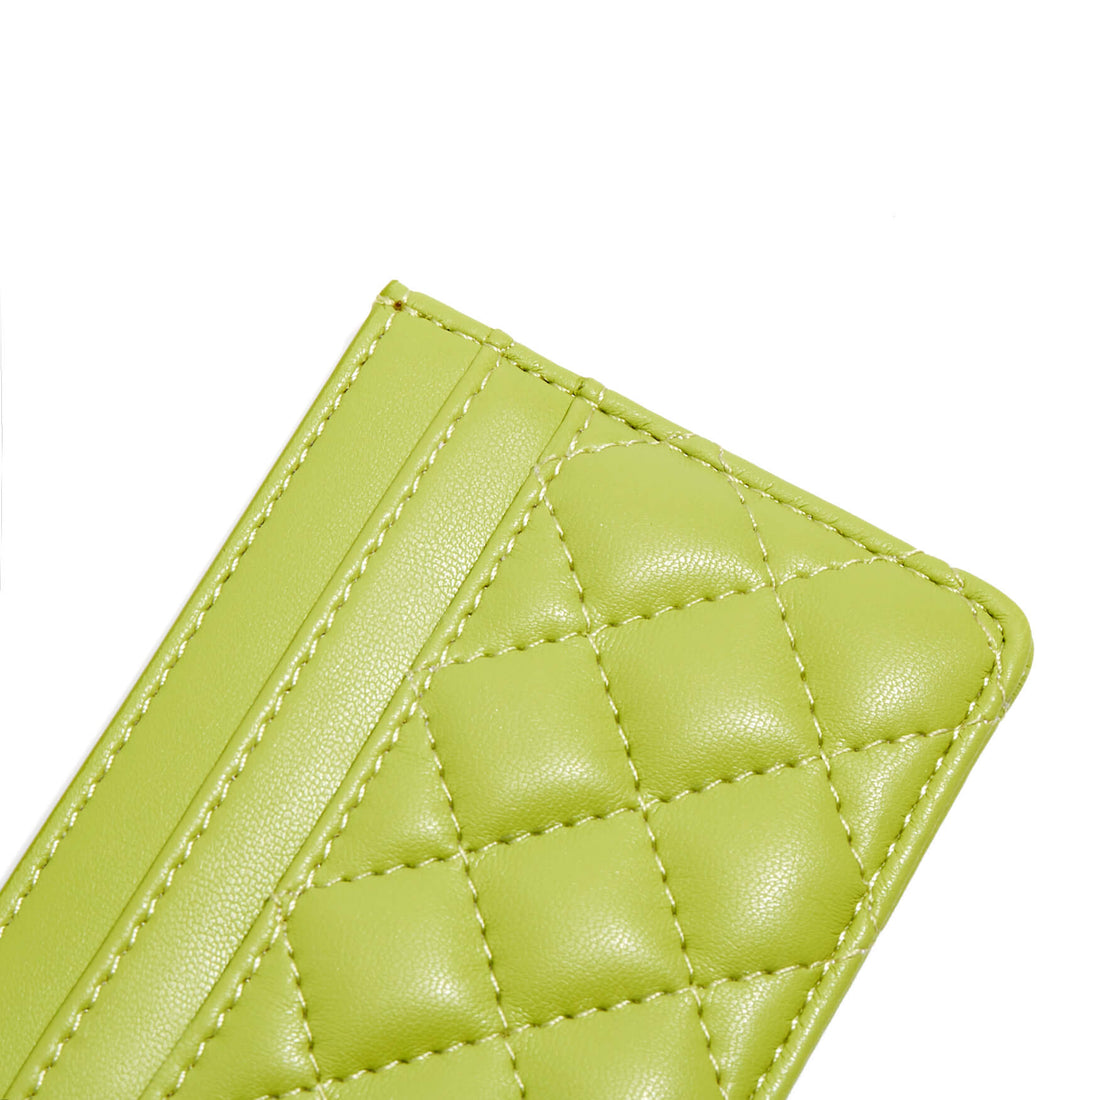 SINBONO Business Card Holder Lime Green